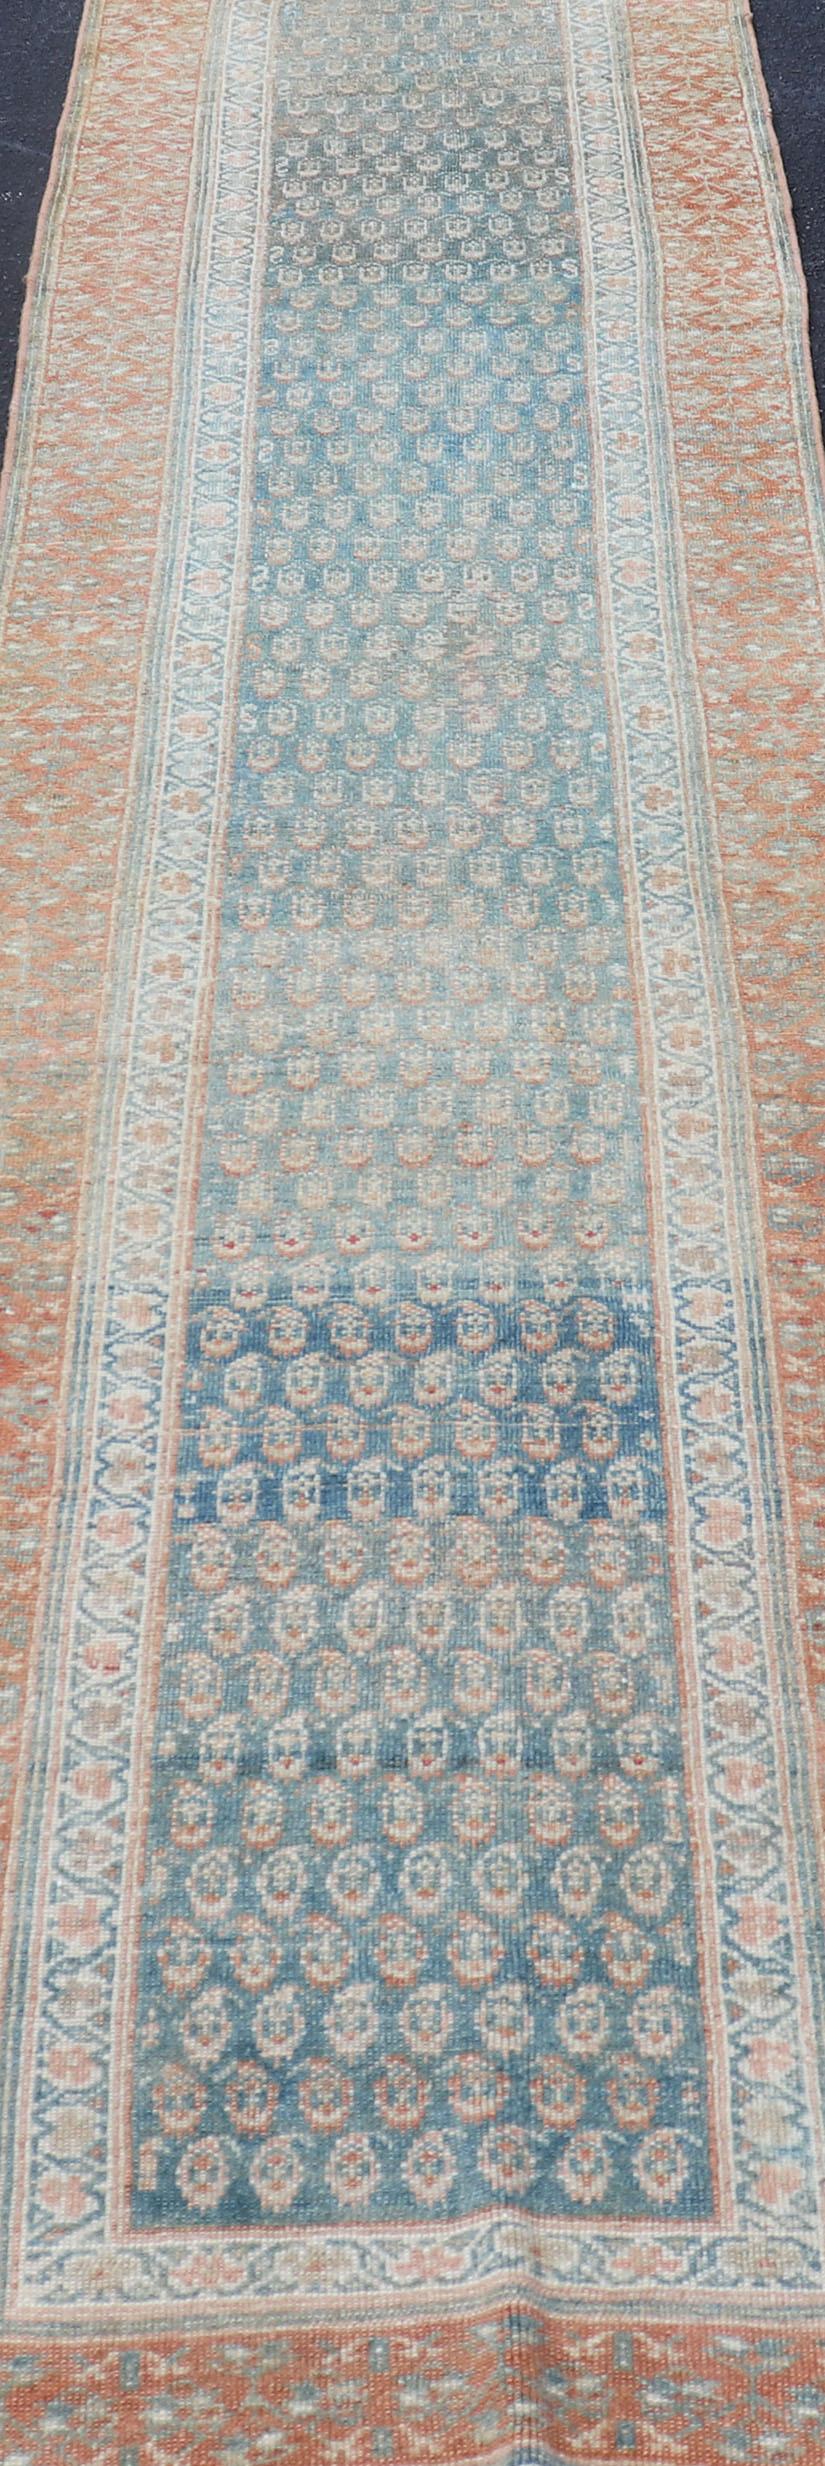 Paisley Field Antique Persian Kurdish Runner in Soft Teal Colors & Orange For Sale 3